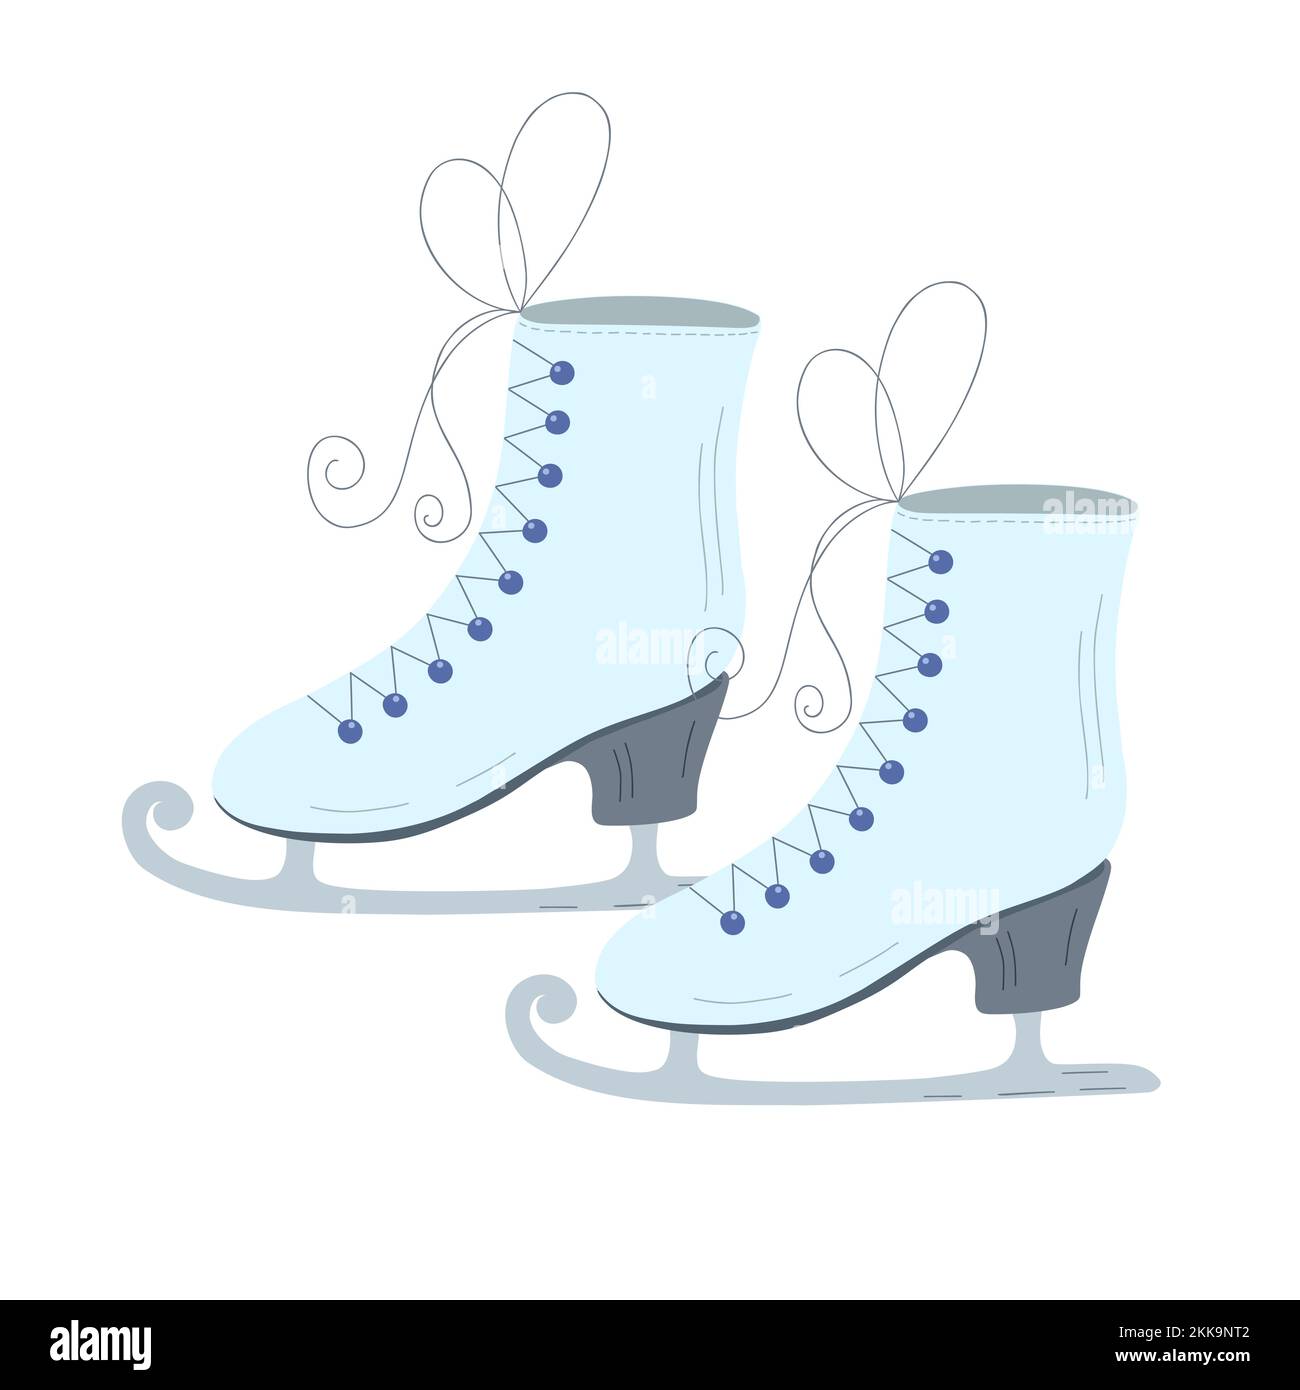 Ice skates cartoon flat style doodle vector illustration, winter leisure or sport activity, shoes for healthy life style and hobby, skating equipment Stock Vector